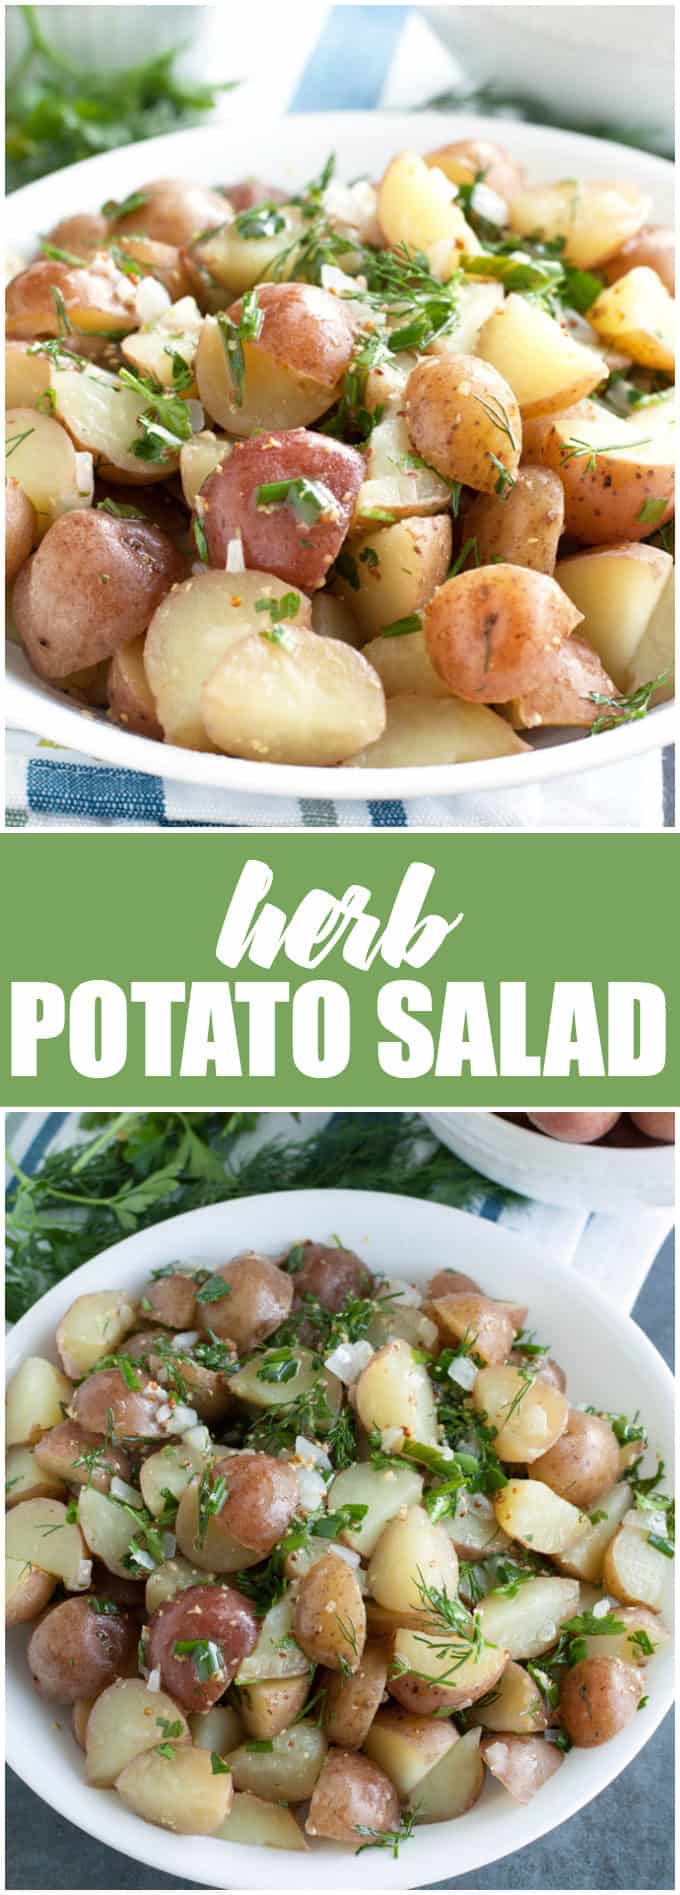 Herb Potato Salad - Keep it clean with this dairy-free potato salad! This easy side dish recipe feels fancy with fresh herbs and red potatoes.